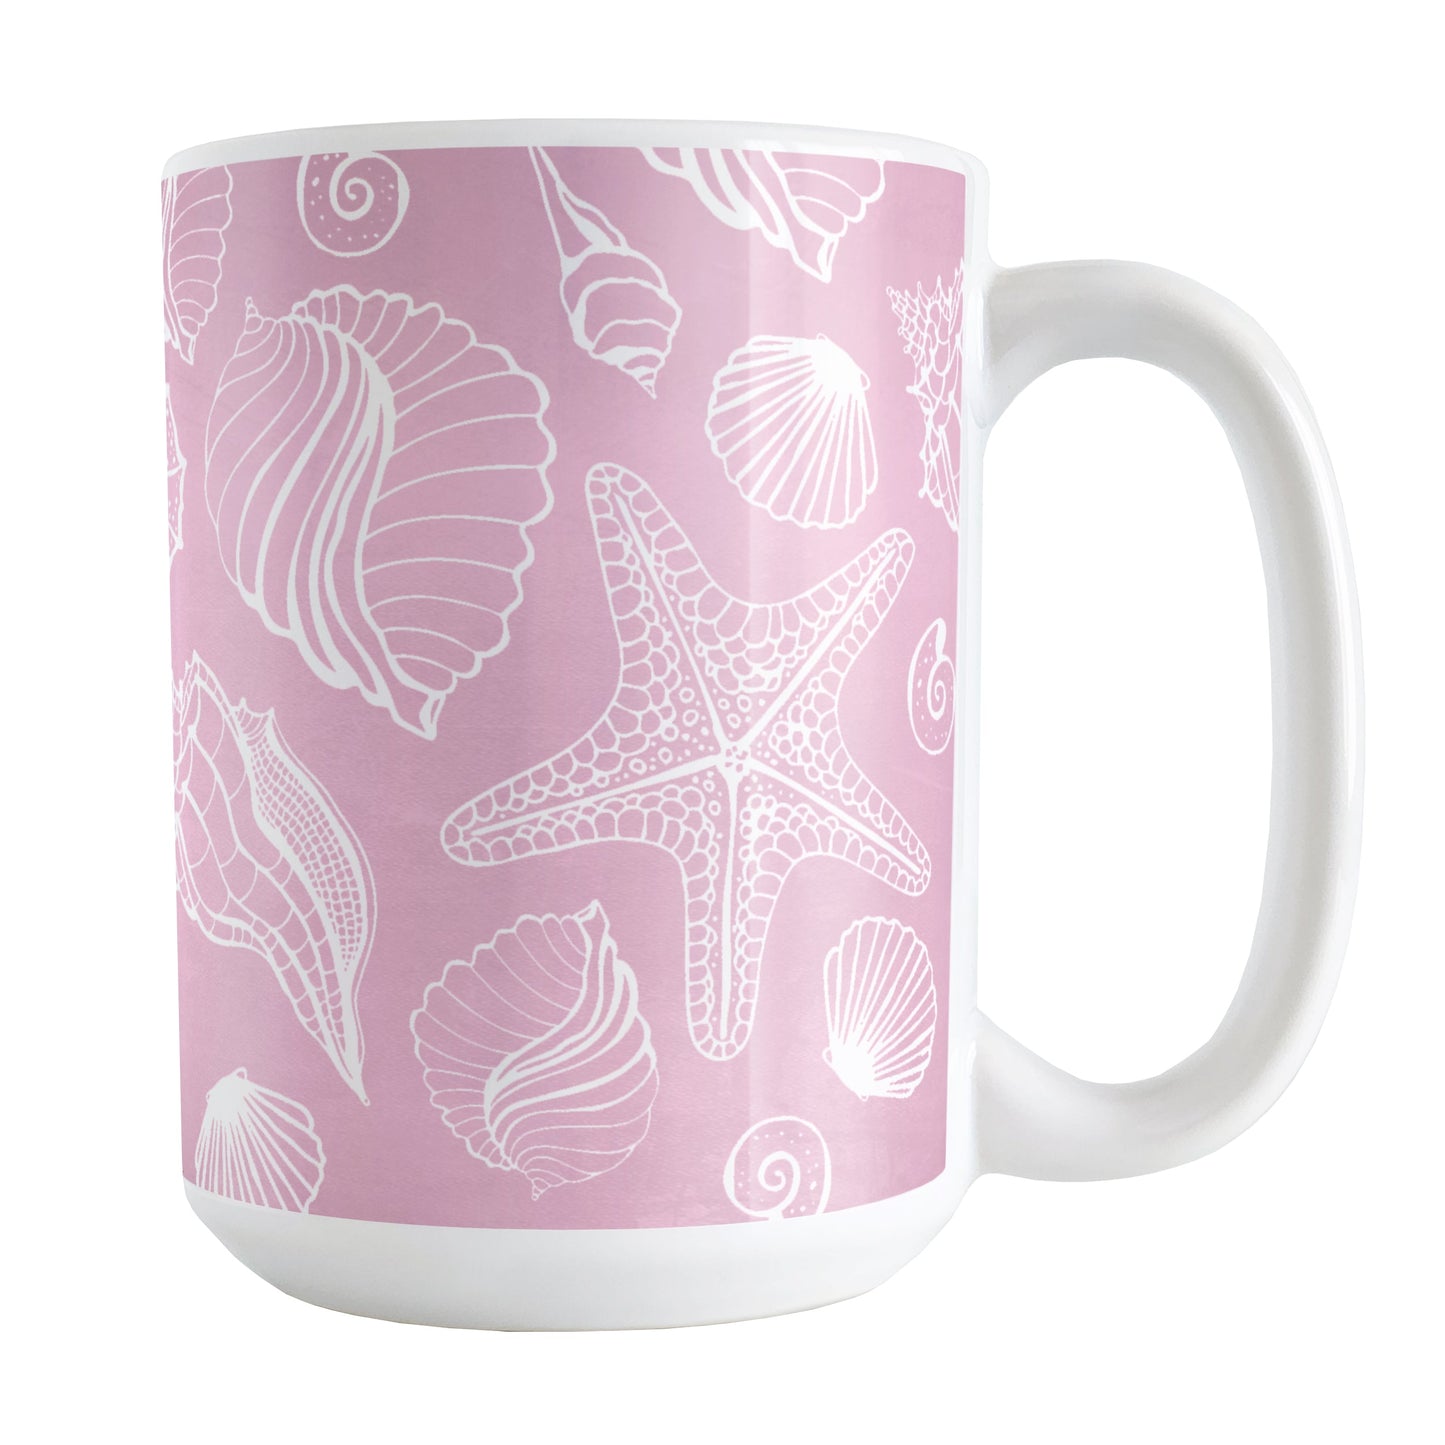 White Seashell Pattern Pink Beach Mug (15oz) at Amy's Coffee Mugs. A ceramic coffee mug designed with a pattern of white seashell line drawings over a pink background that wraps around the mug up to the handle.